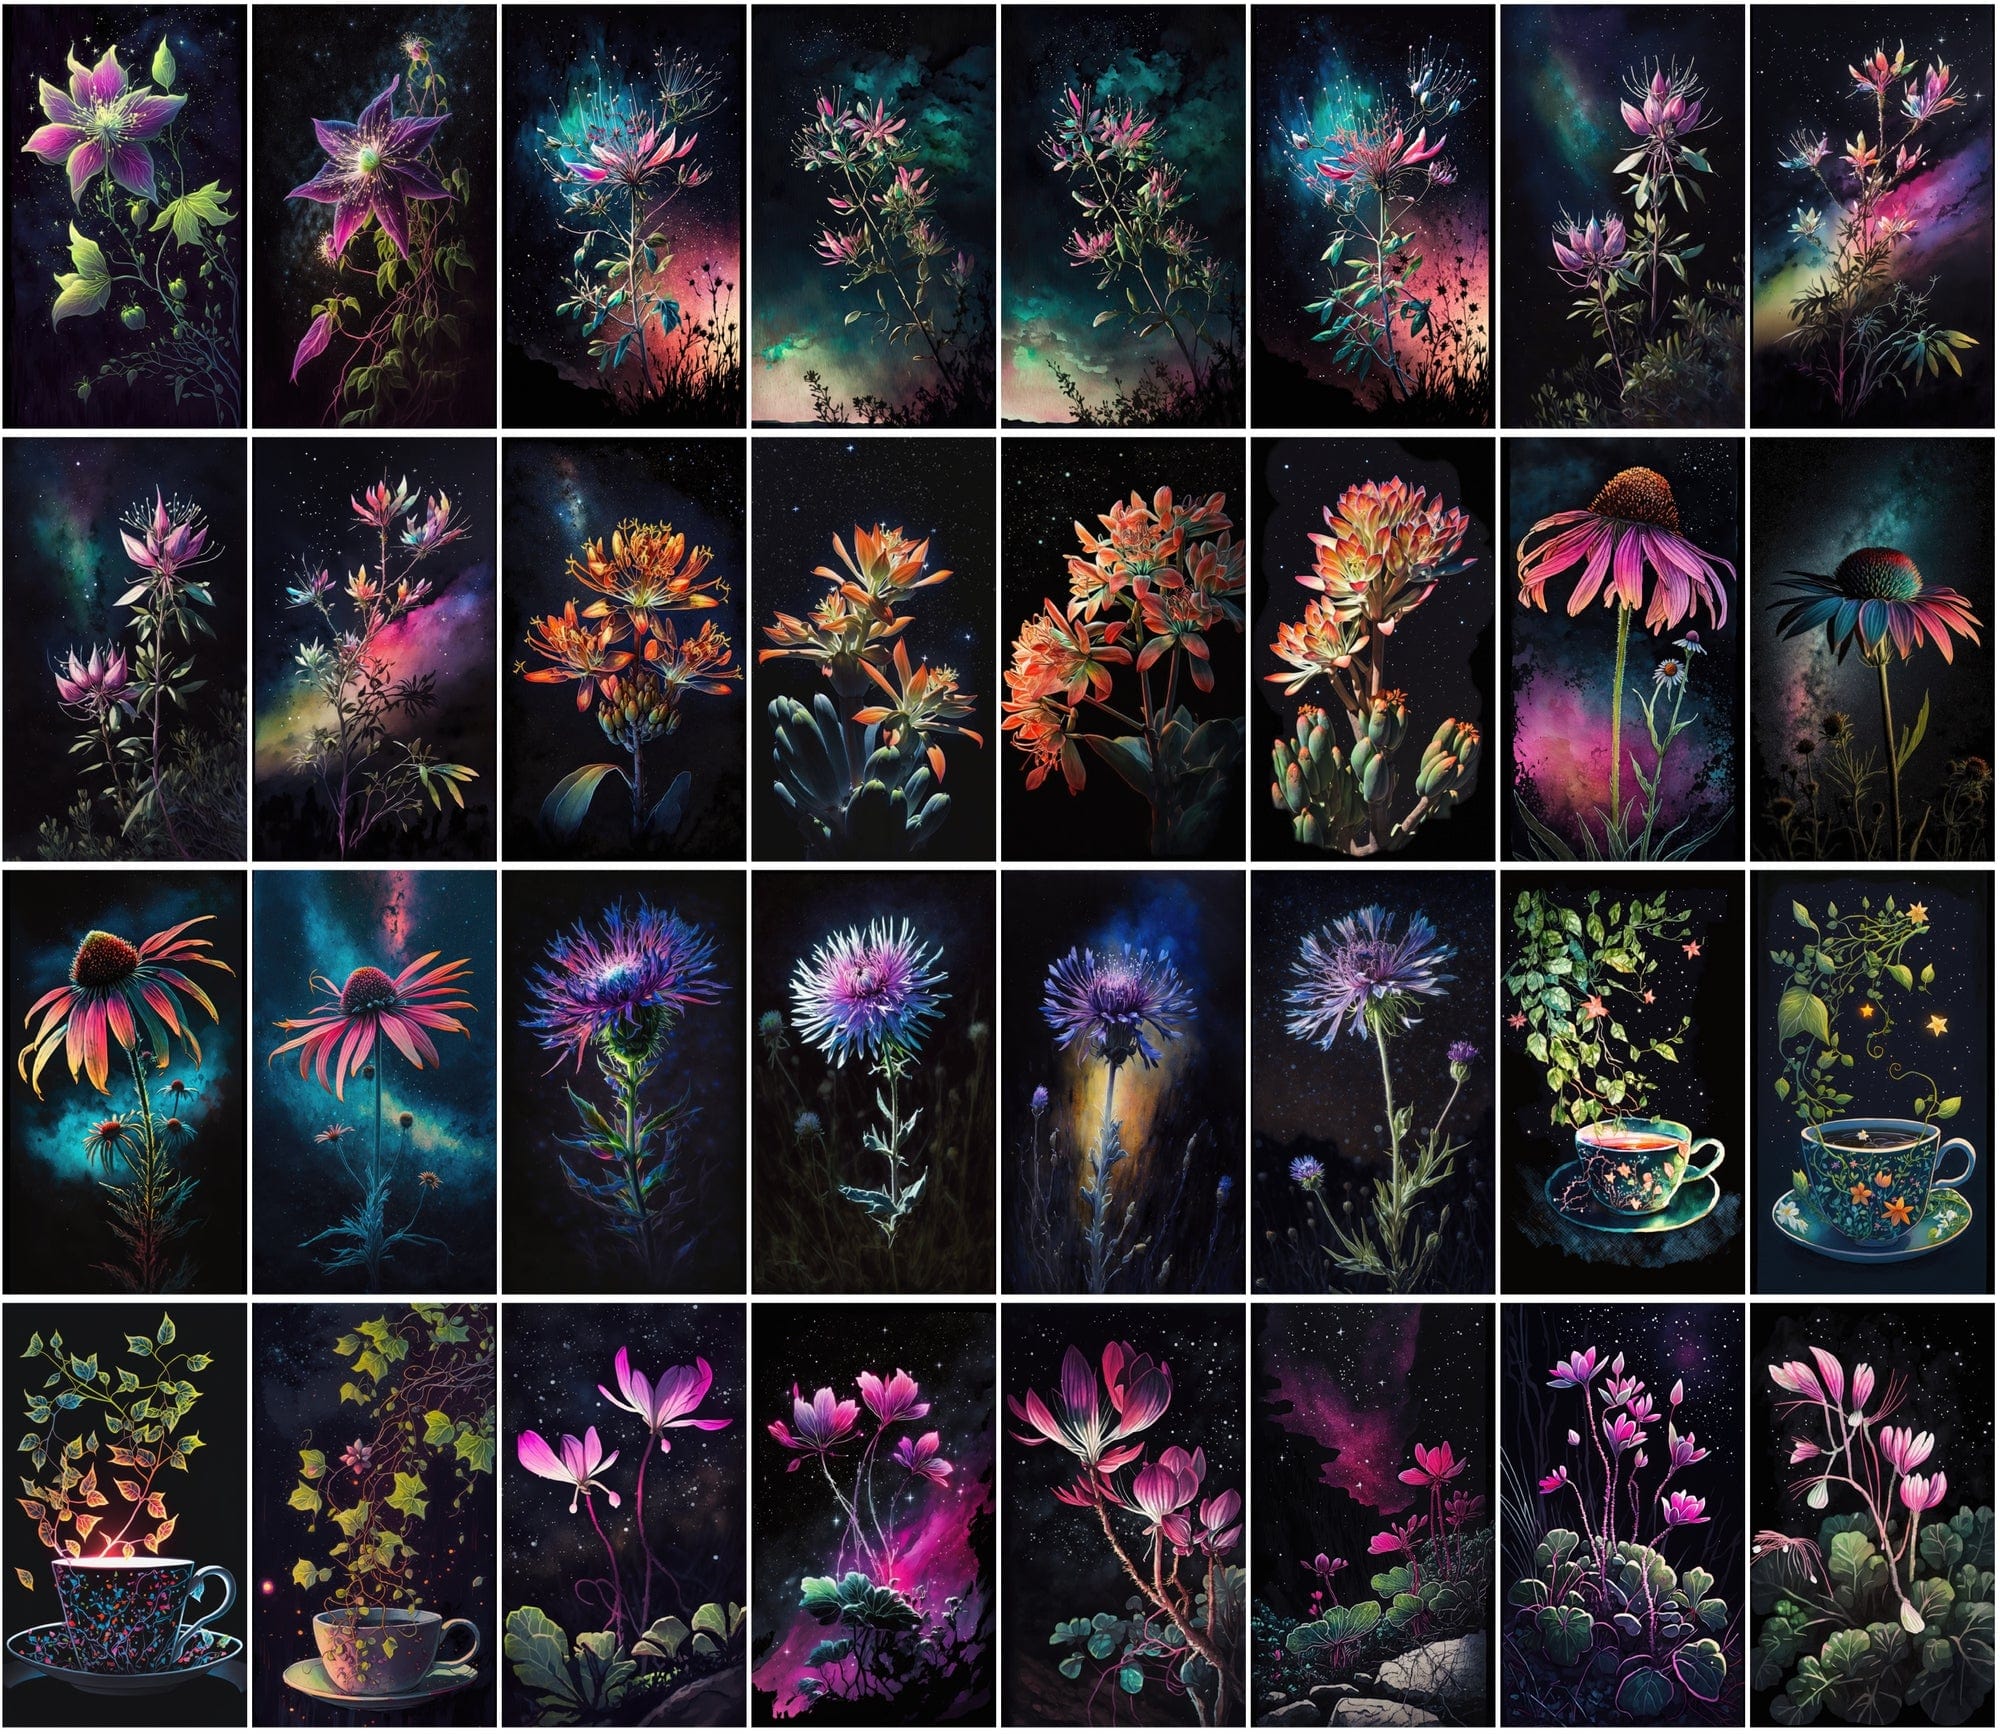 Stunning Floral & Starry Sky Images - High-Resolution, Colorful, Commercial Use - 470 JPG Collection Digital Download Sumobundle